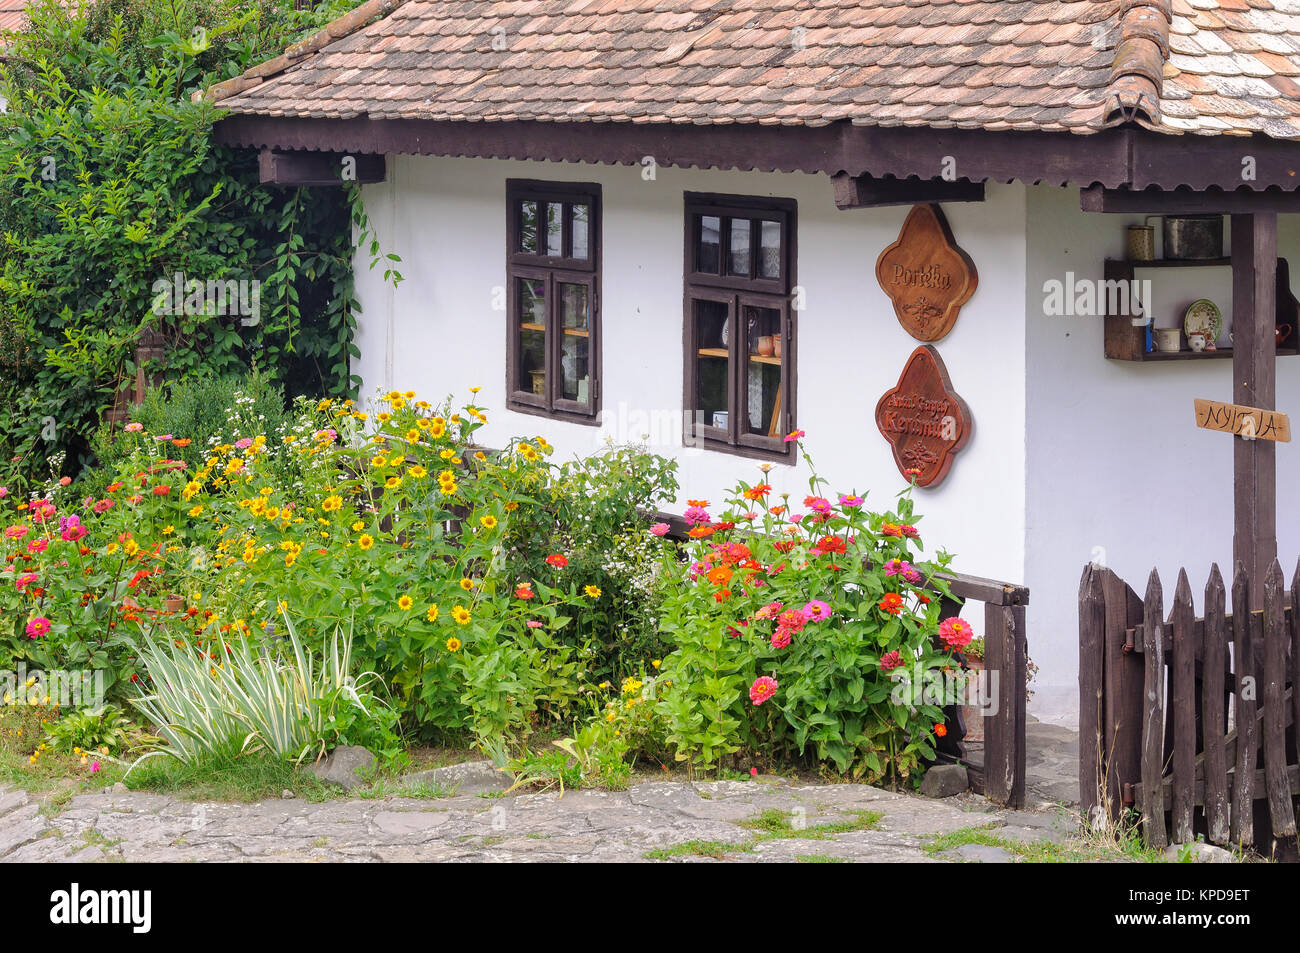 Flowers in front of a traditional Paloc farmhouse in the UNESCO World Heritage village - Holloko, Hungary Stock Photo